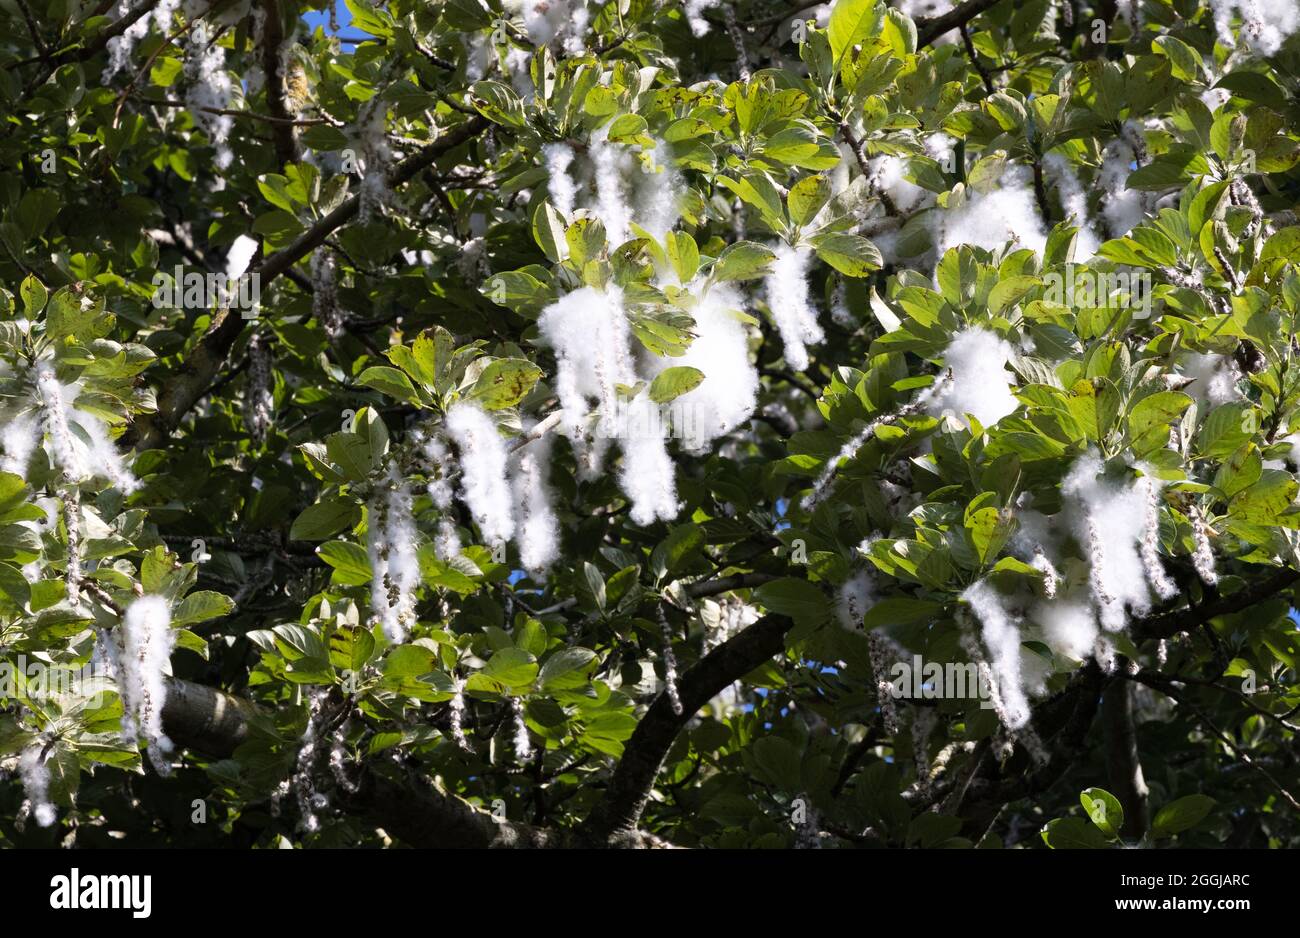 The Japanese Poplar tree, Populus maximowiczii , a deciduous tree with fluffy catkins fruits in august, seen here in this tree growing in Edinburgh. Stock Photo